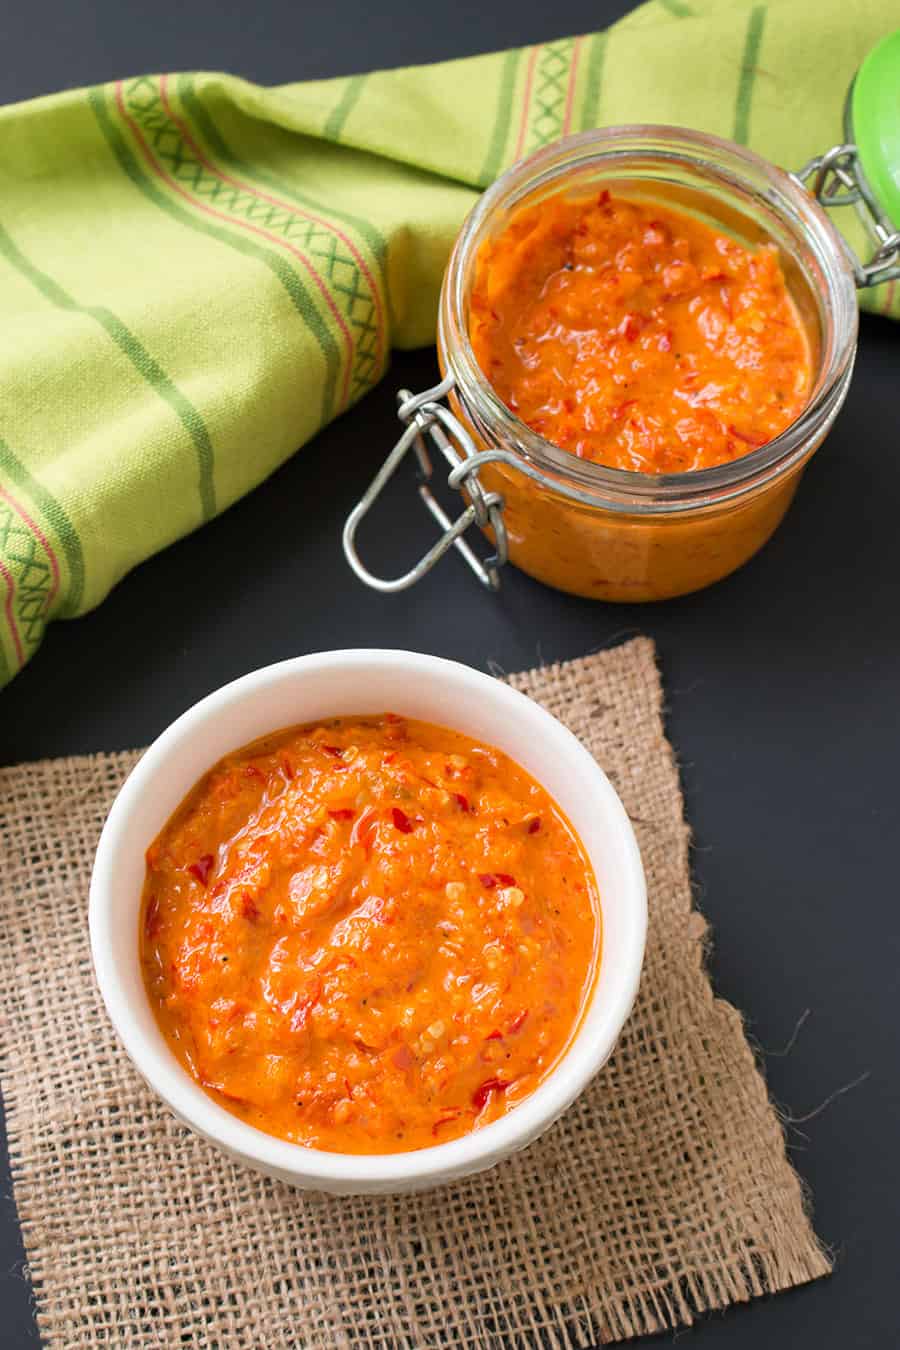 Fresh Chili Paste Recipe - How to Make Chili Paste from Fresh Peppers